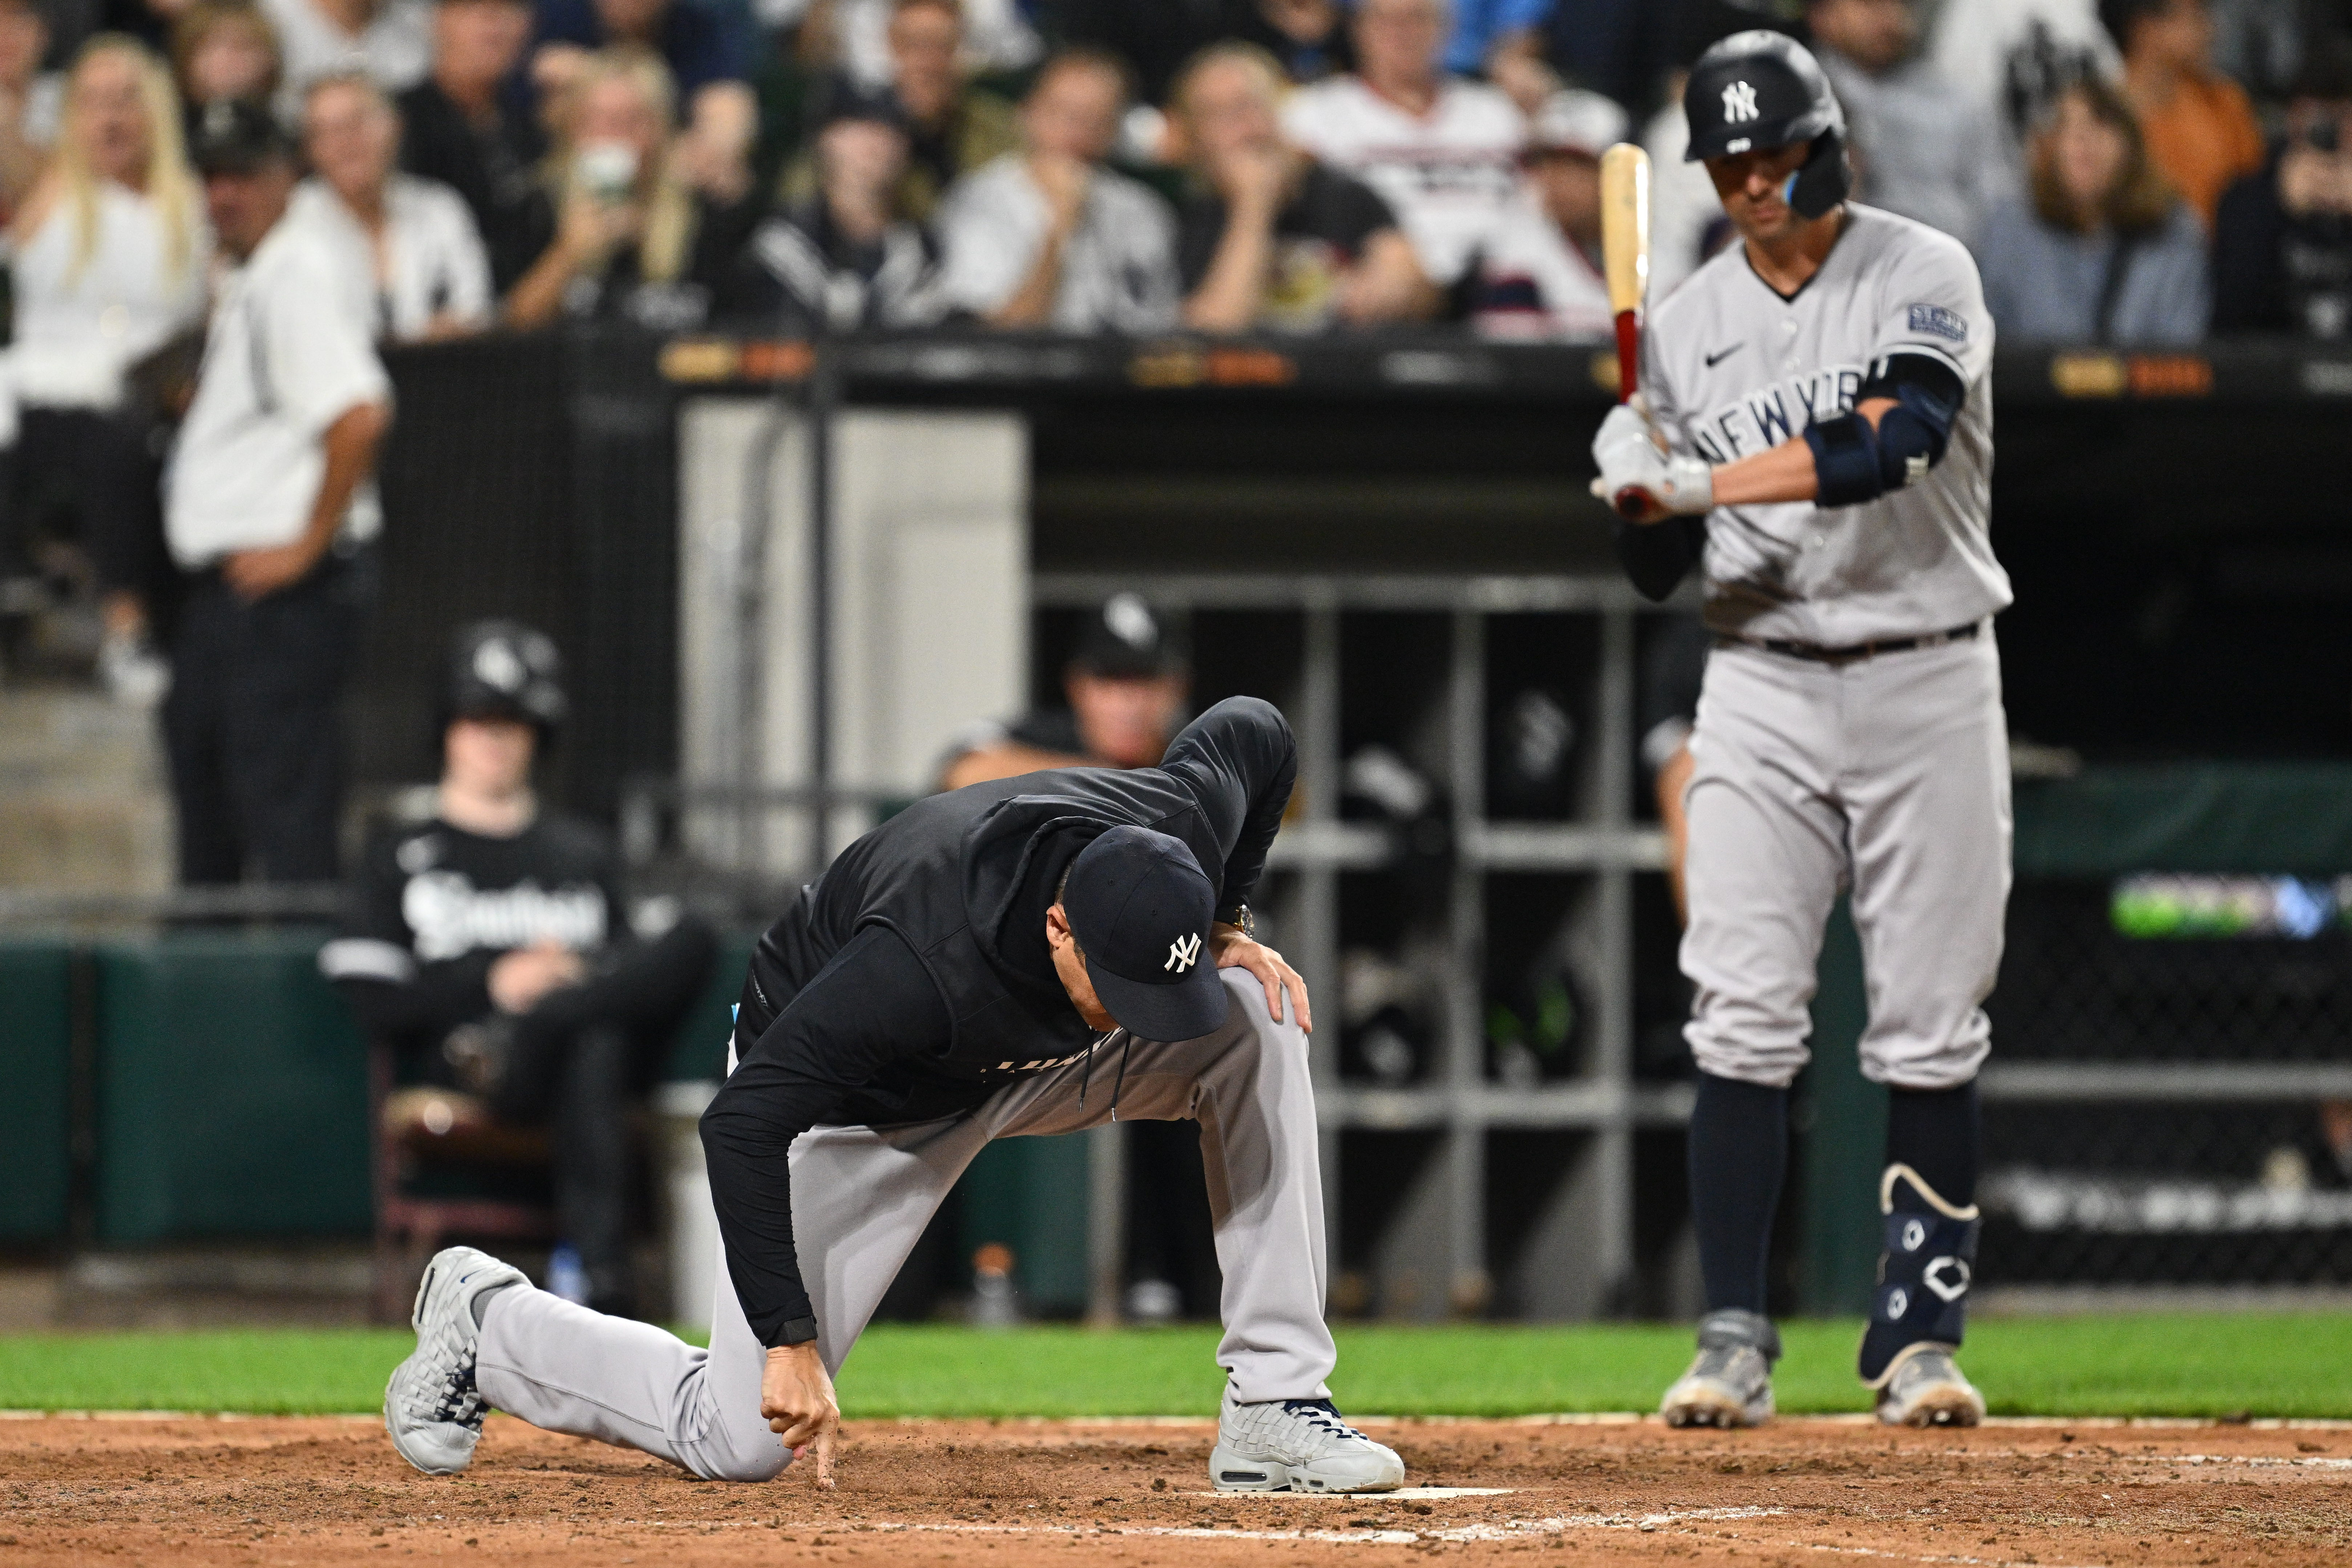 White Sox take another step up with 3-2 win over Yankees